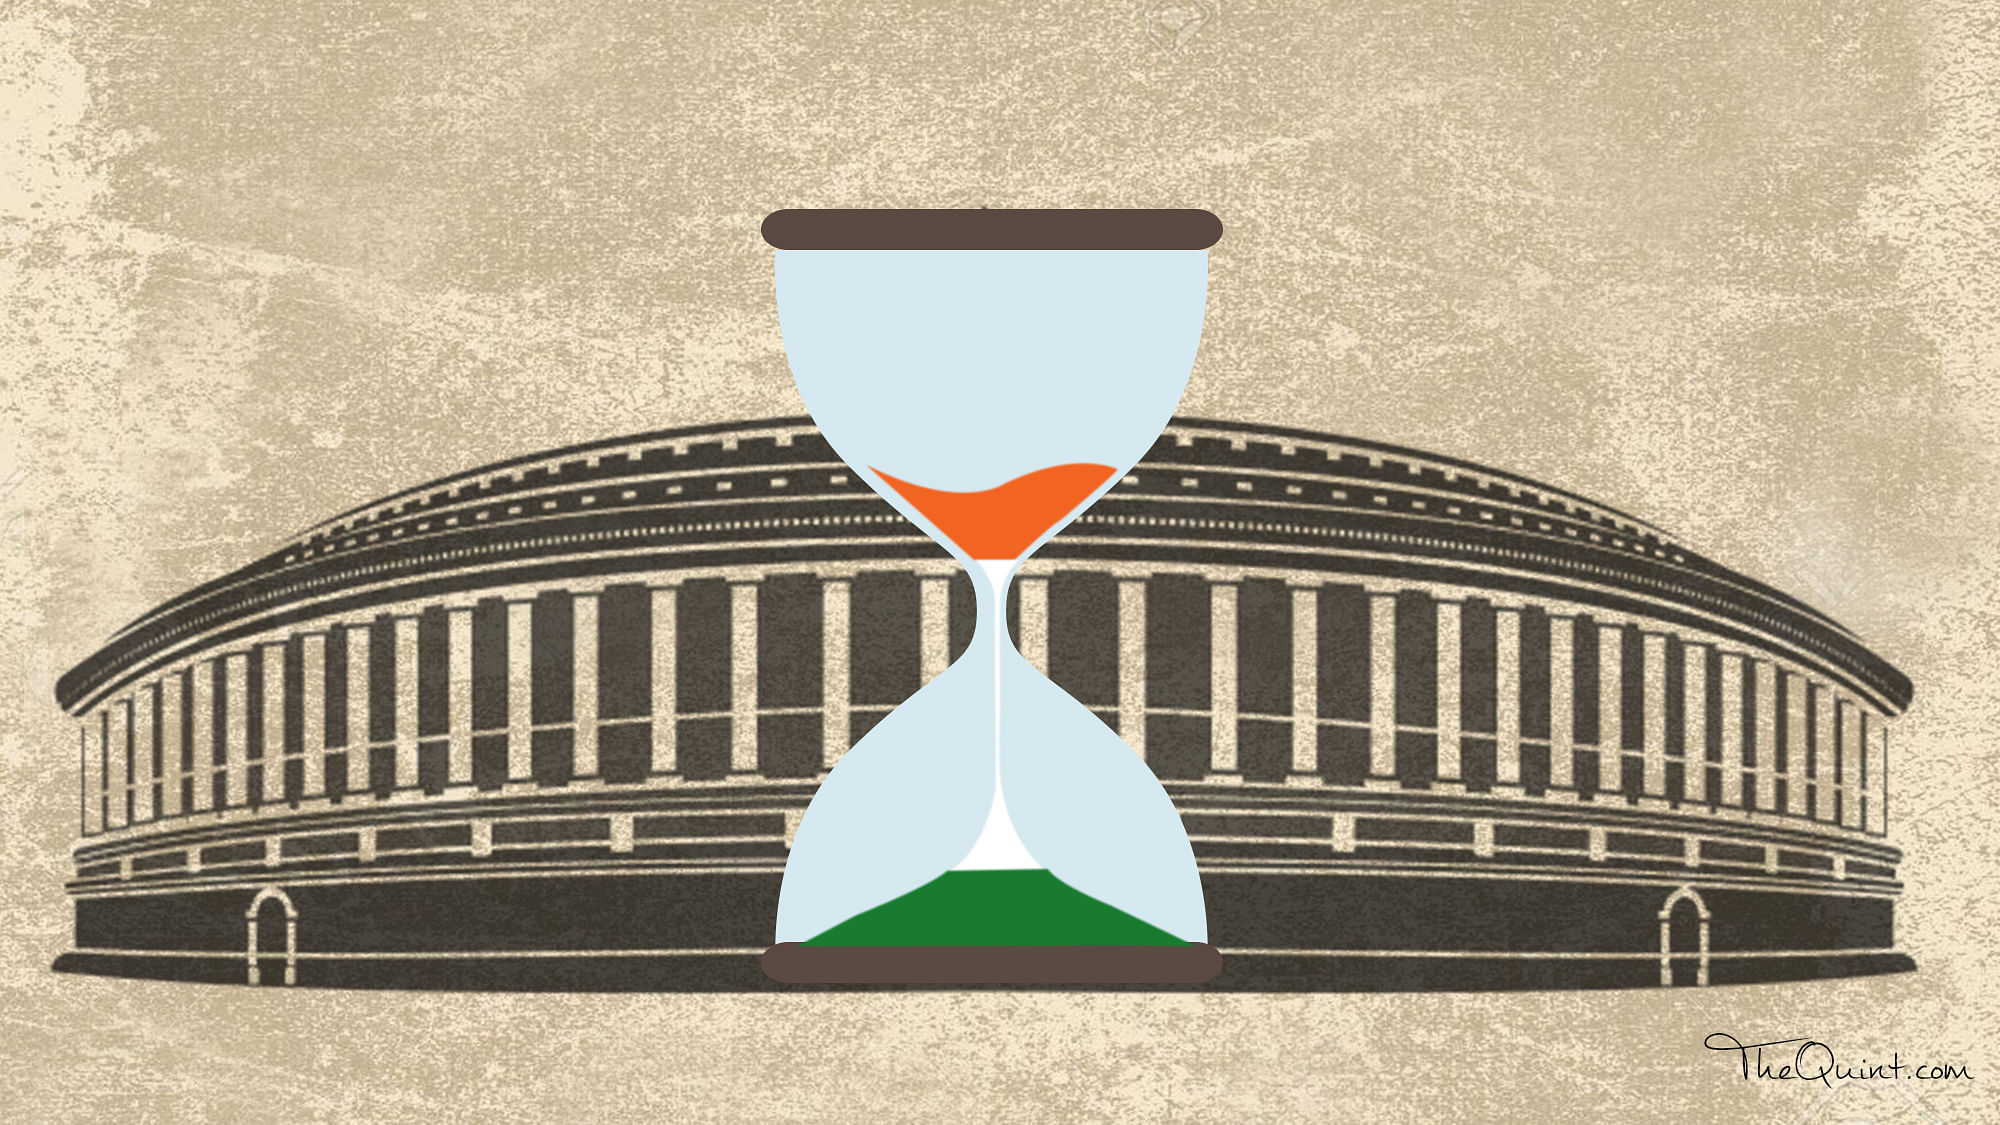 The month-long winter session of Parliament which concluded on Friday was a wash-out with negligible business being conducted. (Image: <b>The Quint</b>)